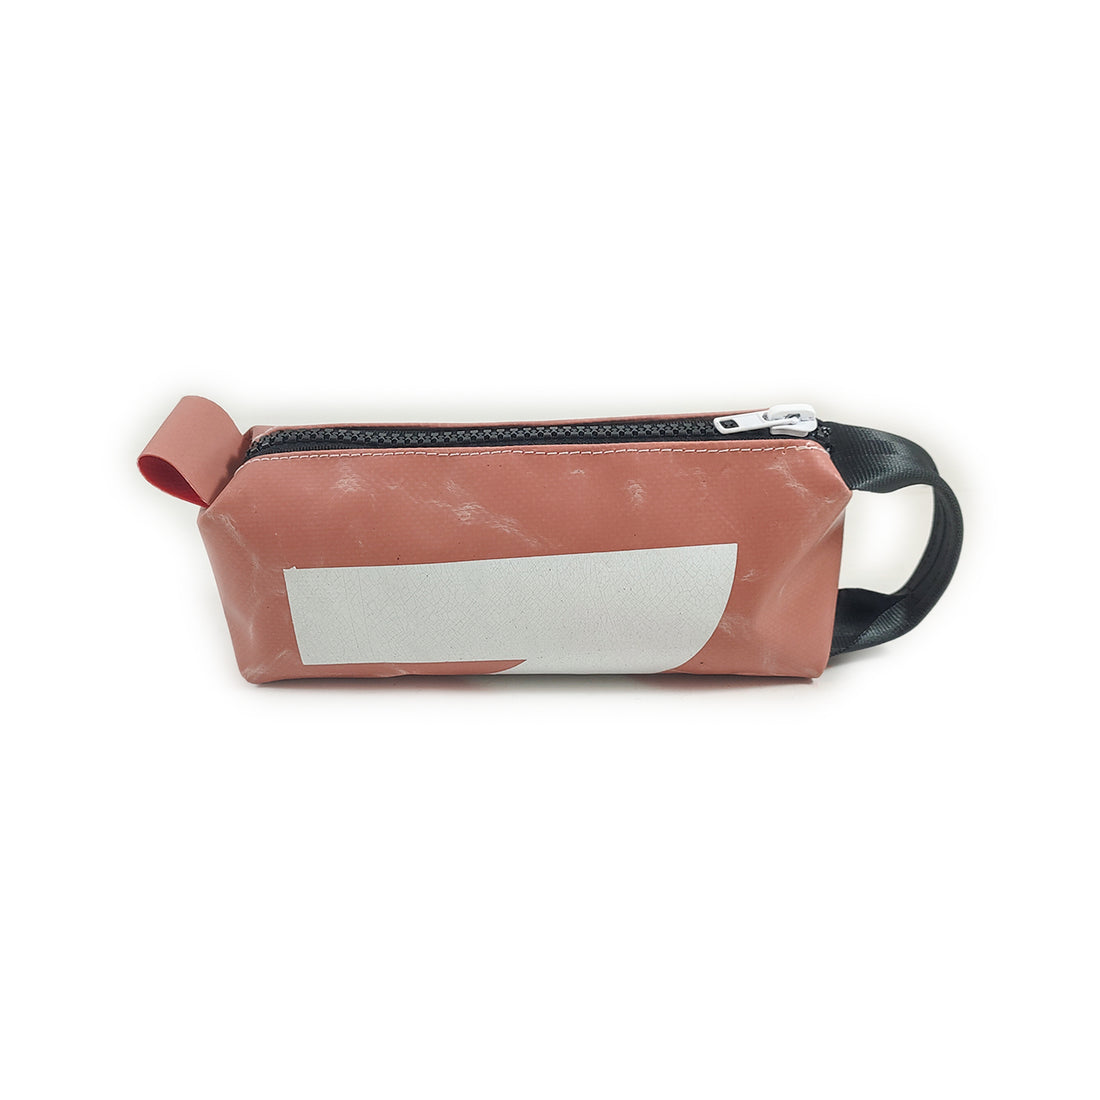 J-Pouch | 002 - Pencil Case and Toiletry Bag Made From UpCycled Materials